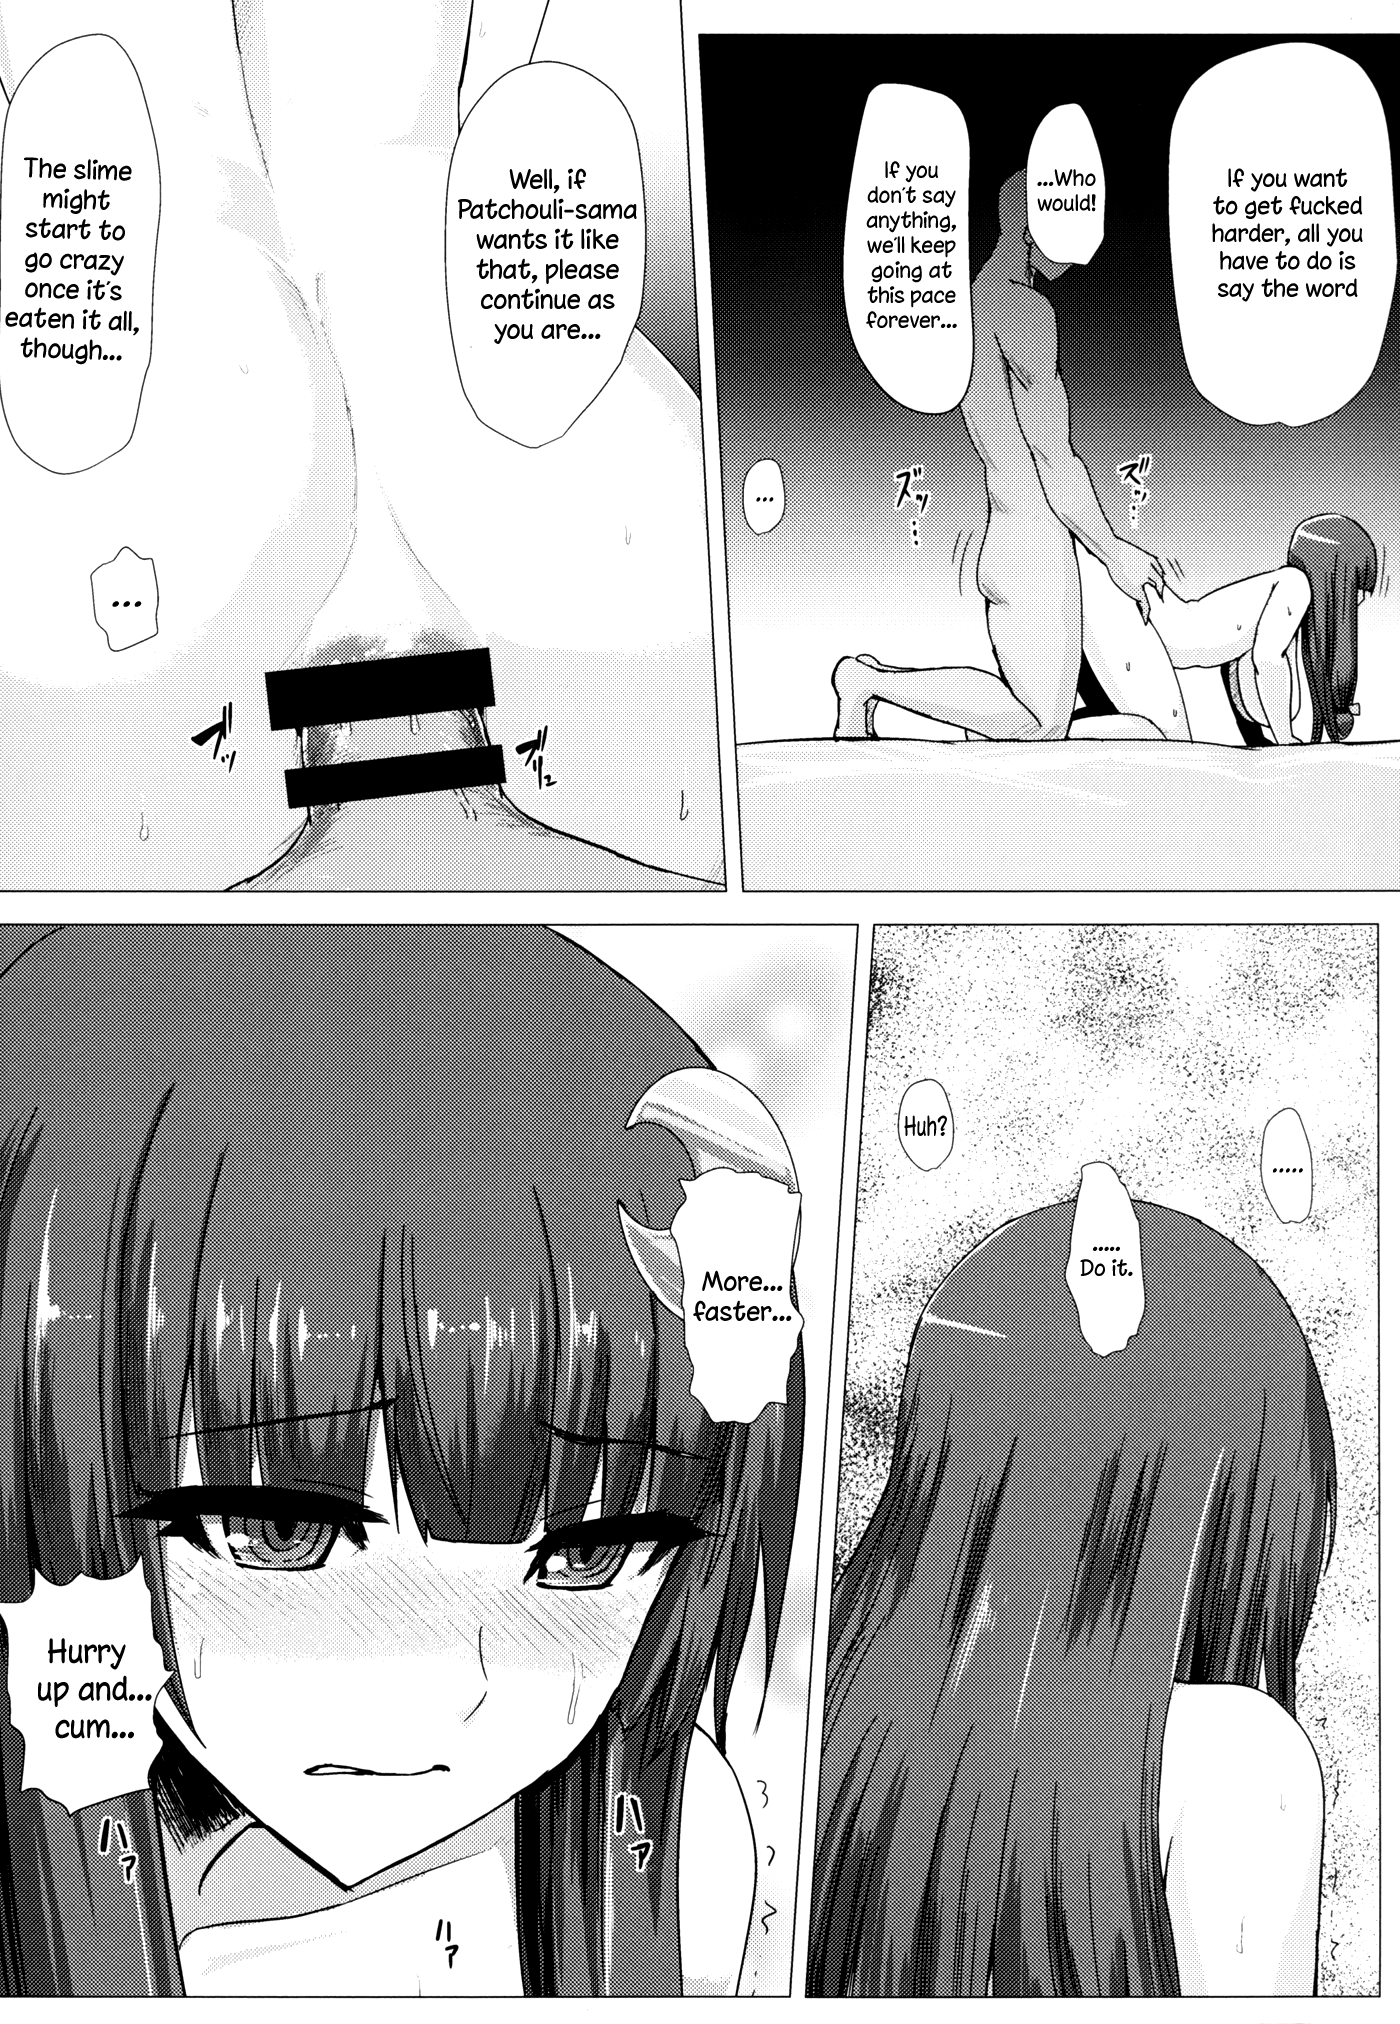 Ass Patchy Patchy hentai manga picture 19